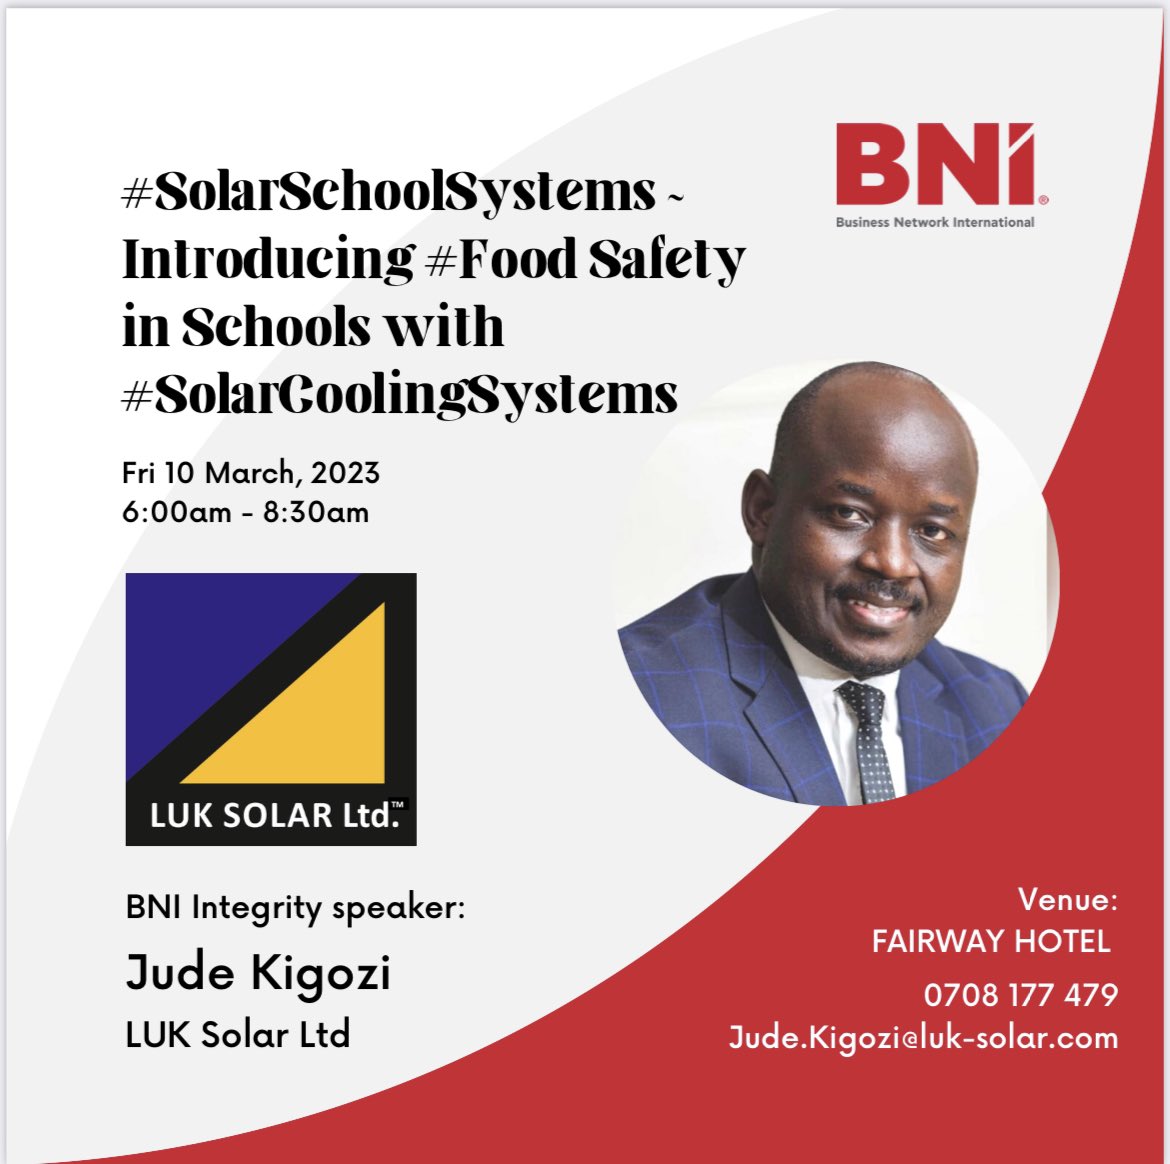 You are invited. Especially if you a leader in school administration or a business Leader! This Friday, doors open at 6am 🕕 #DoingGoodTogether #BetterTomorrow @PKconversations @smartgirlsug @ChoudryDaniel @Capitalsolns #SolarSchoolSystems #SolarCoolingSystems @luksolar